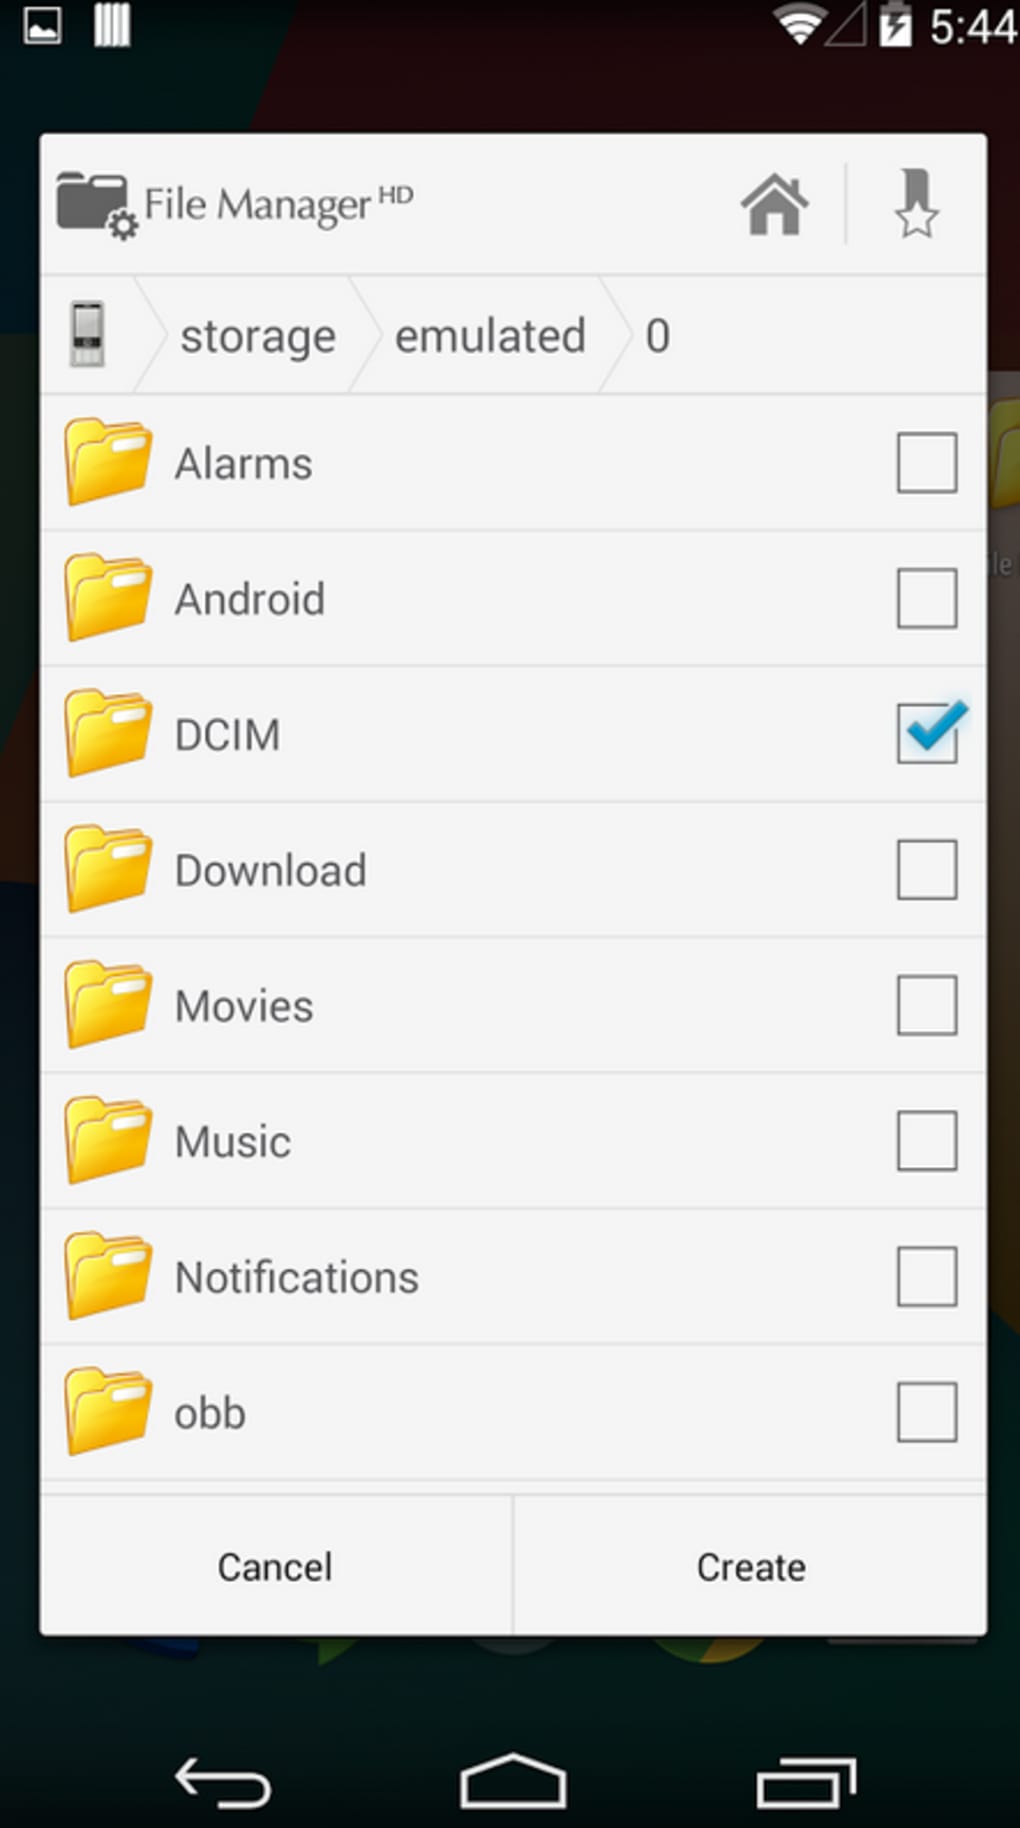 Download my file manager for windows phone service